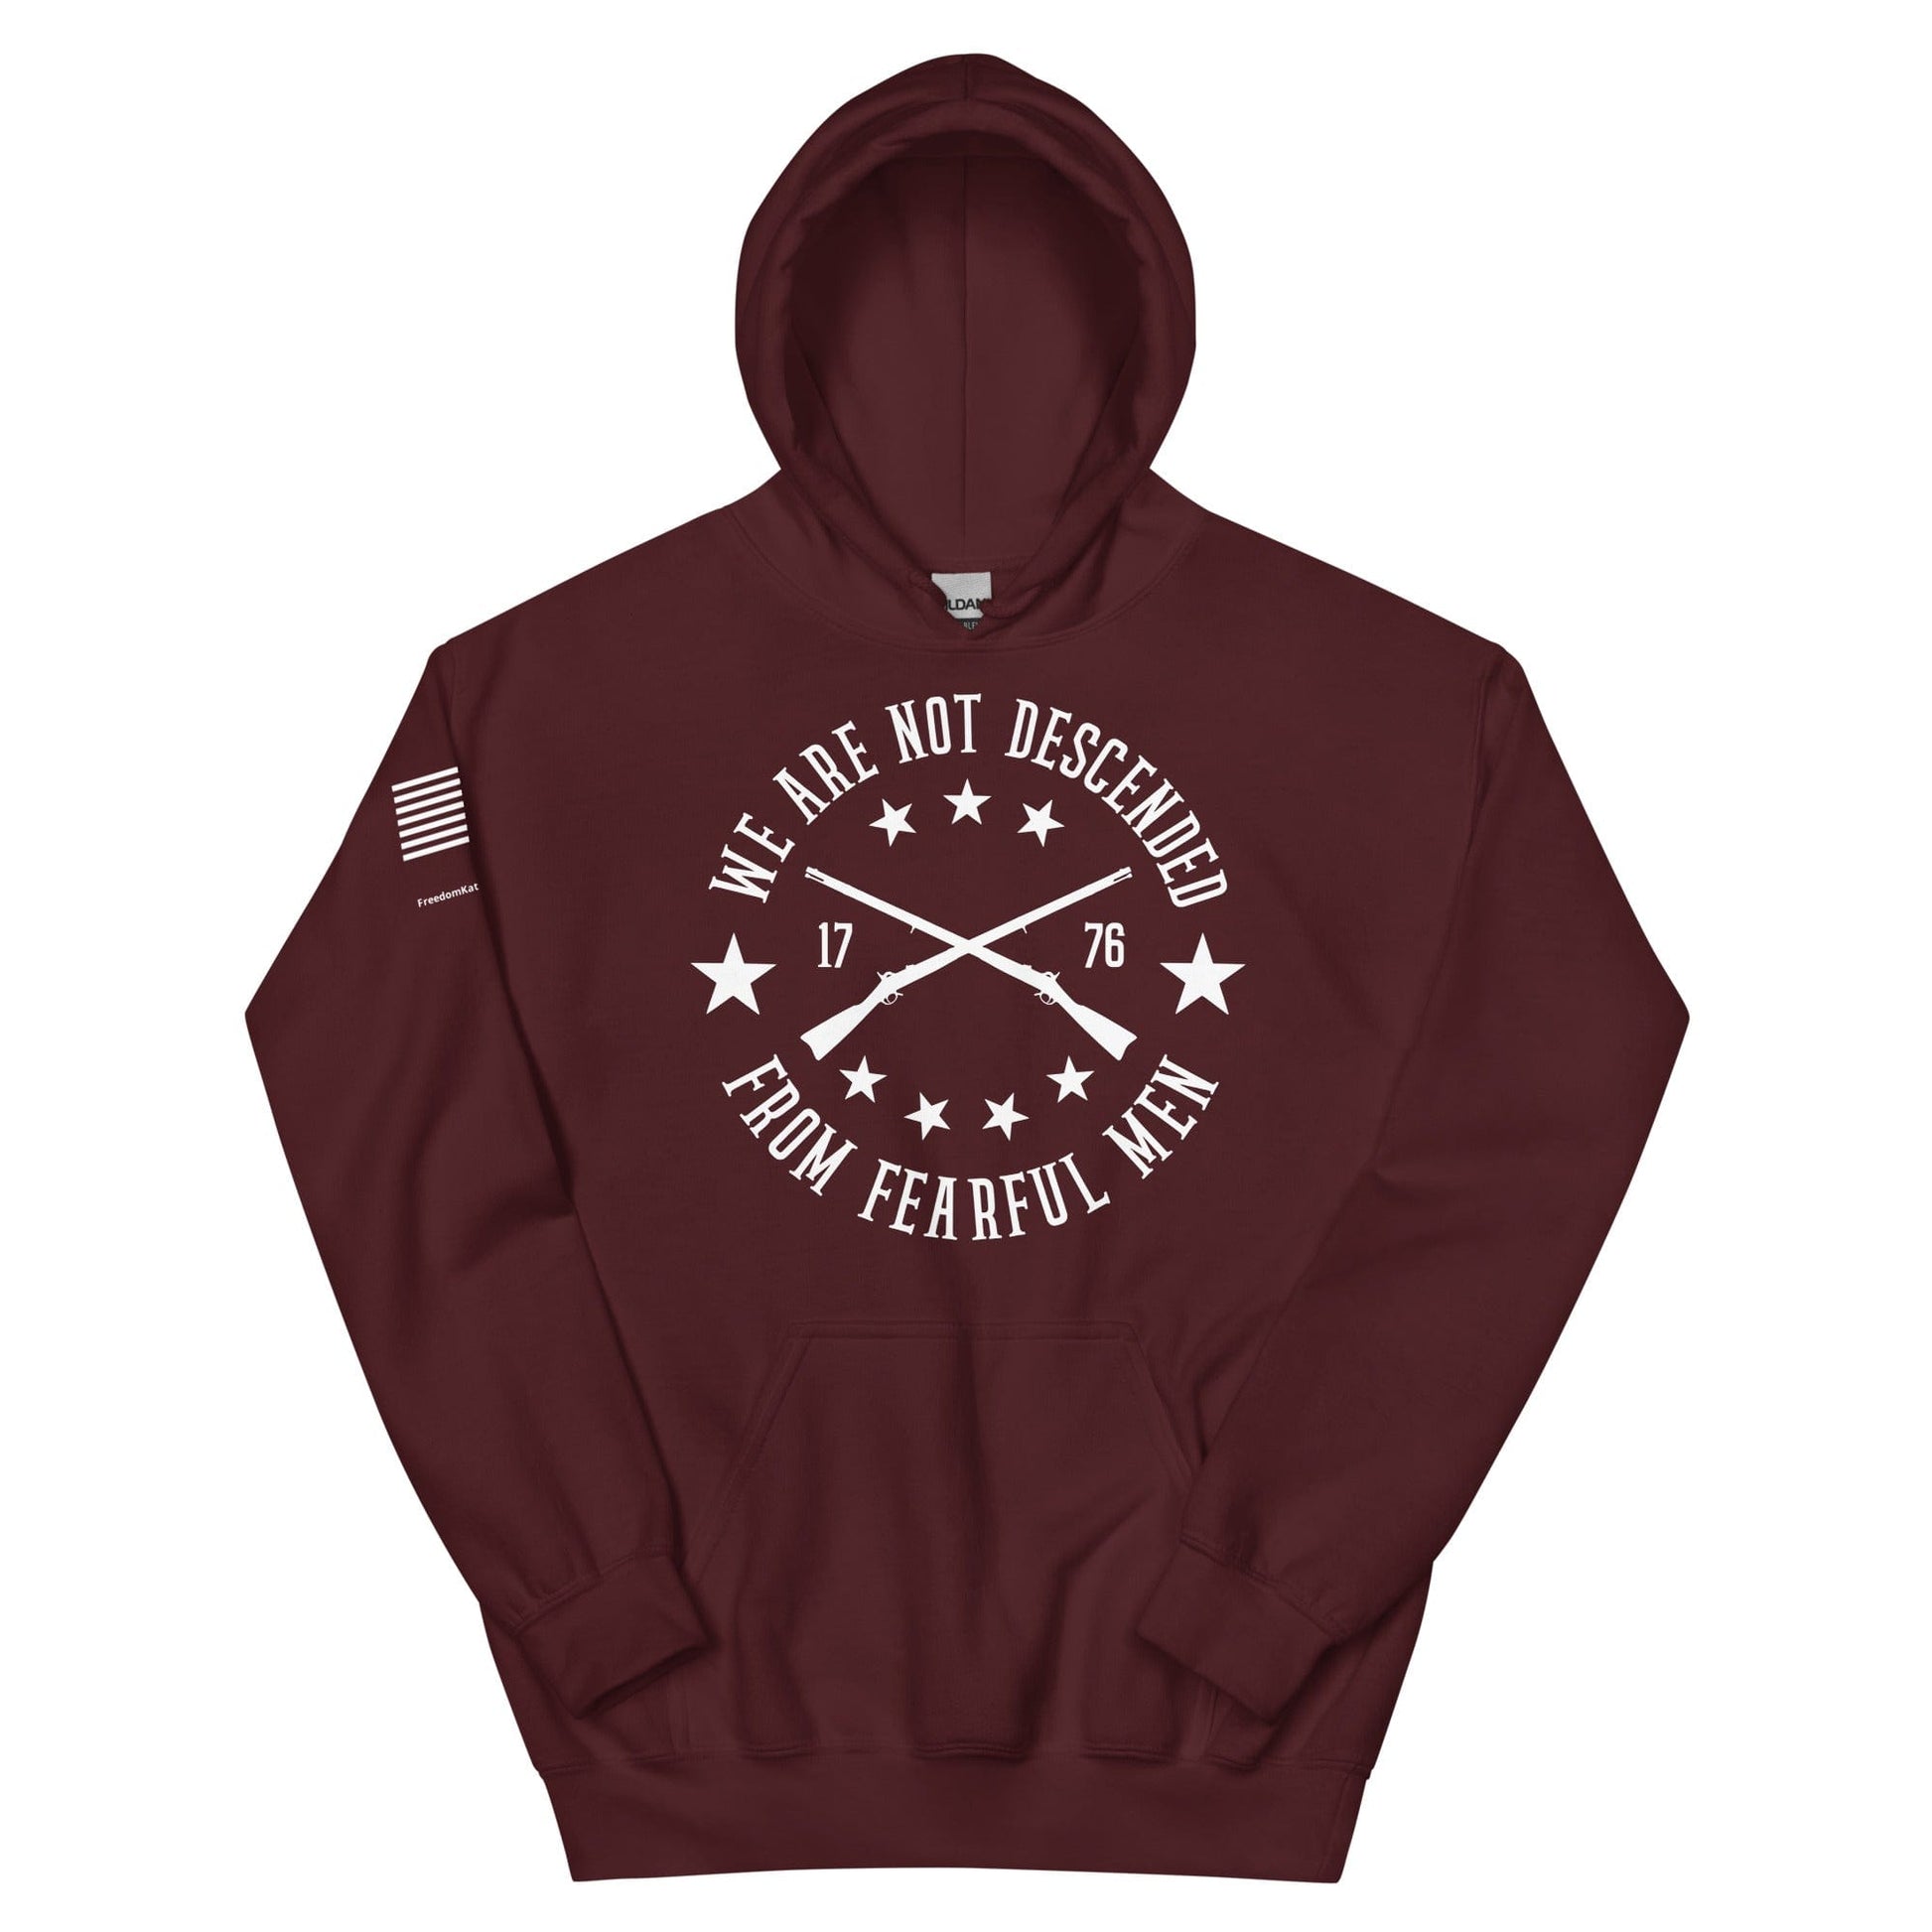 FreedomKat Designs Hoodie Maroon / S We Are Not Descended From Fearful Men Hoodie